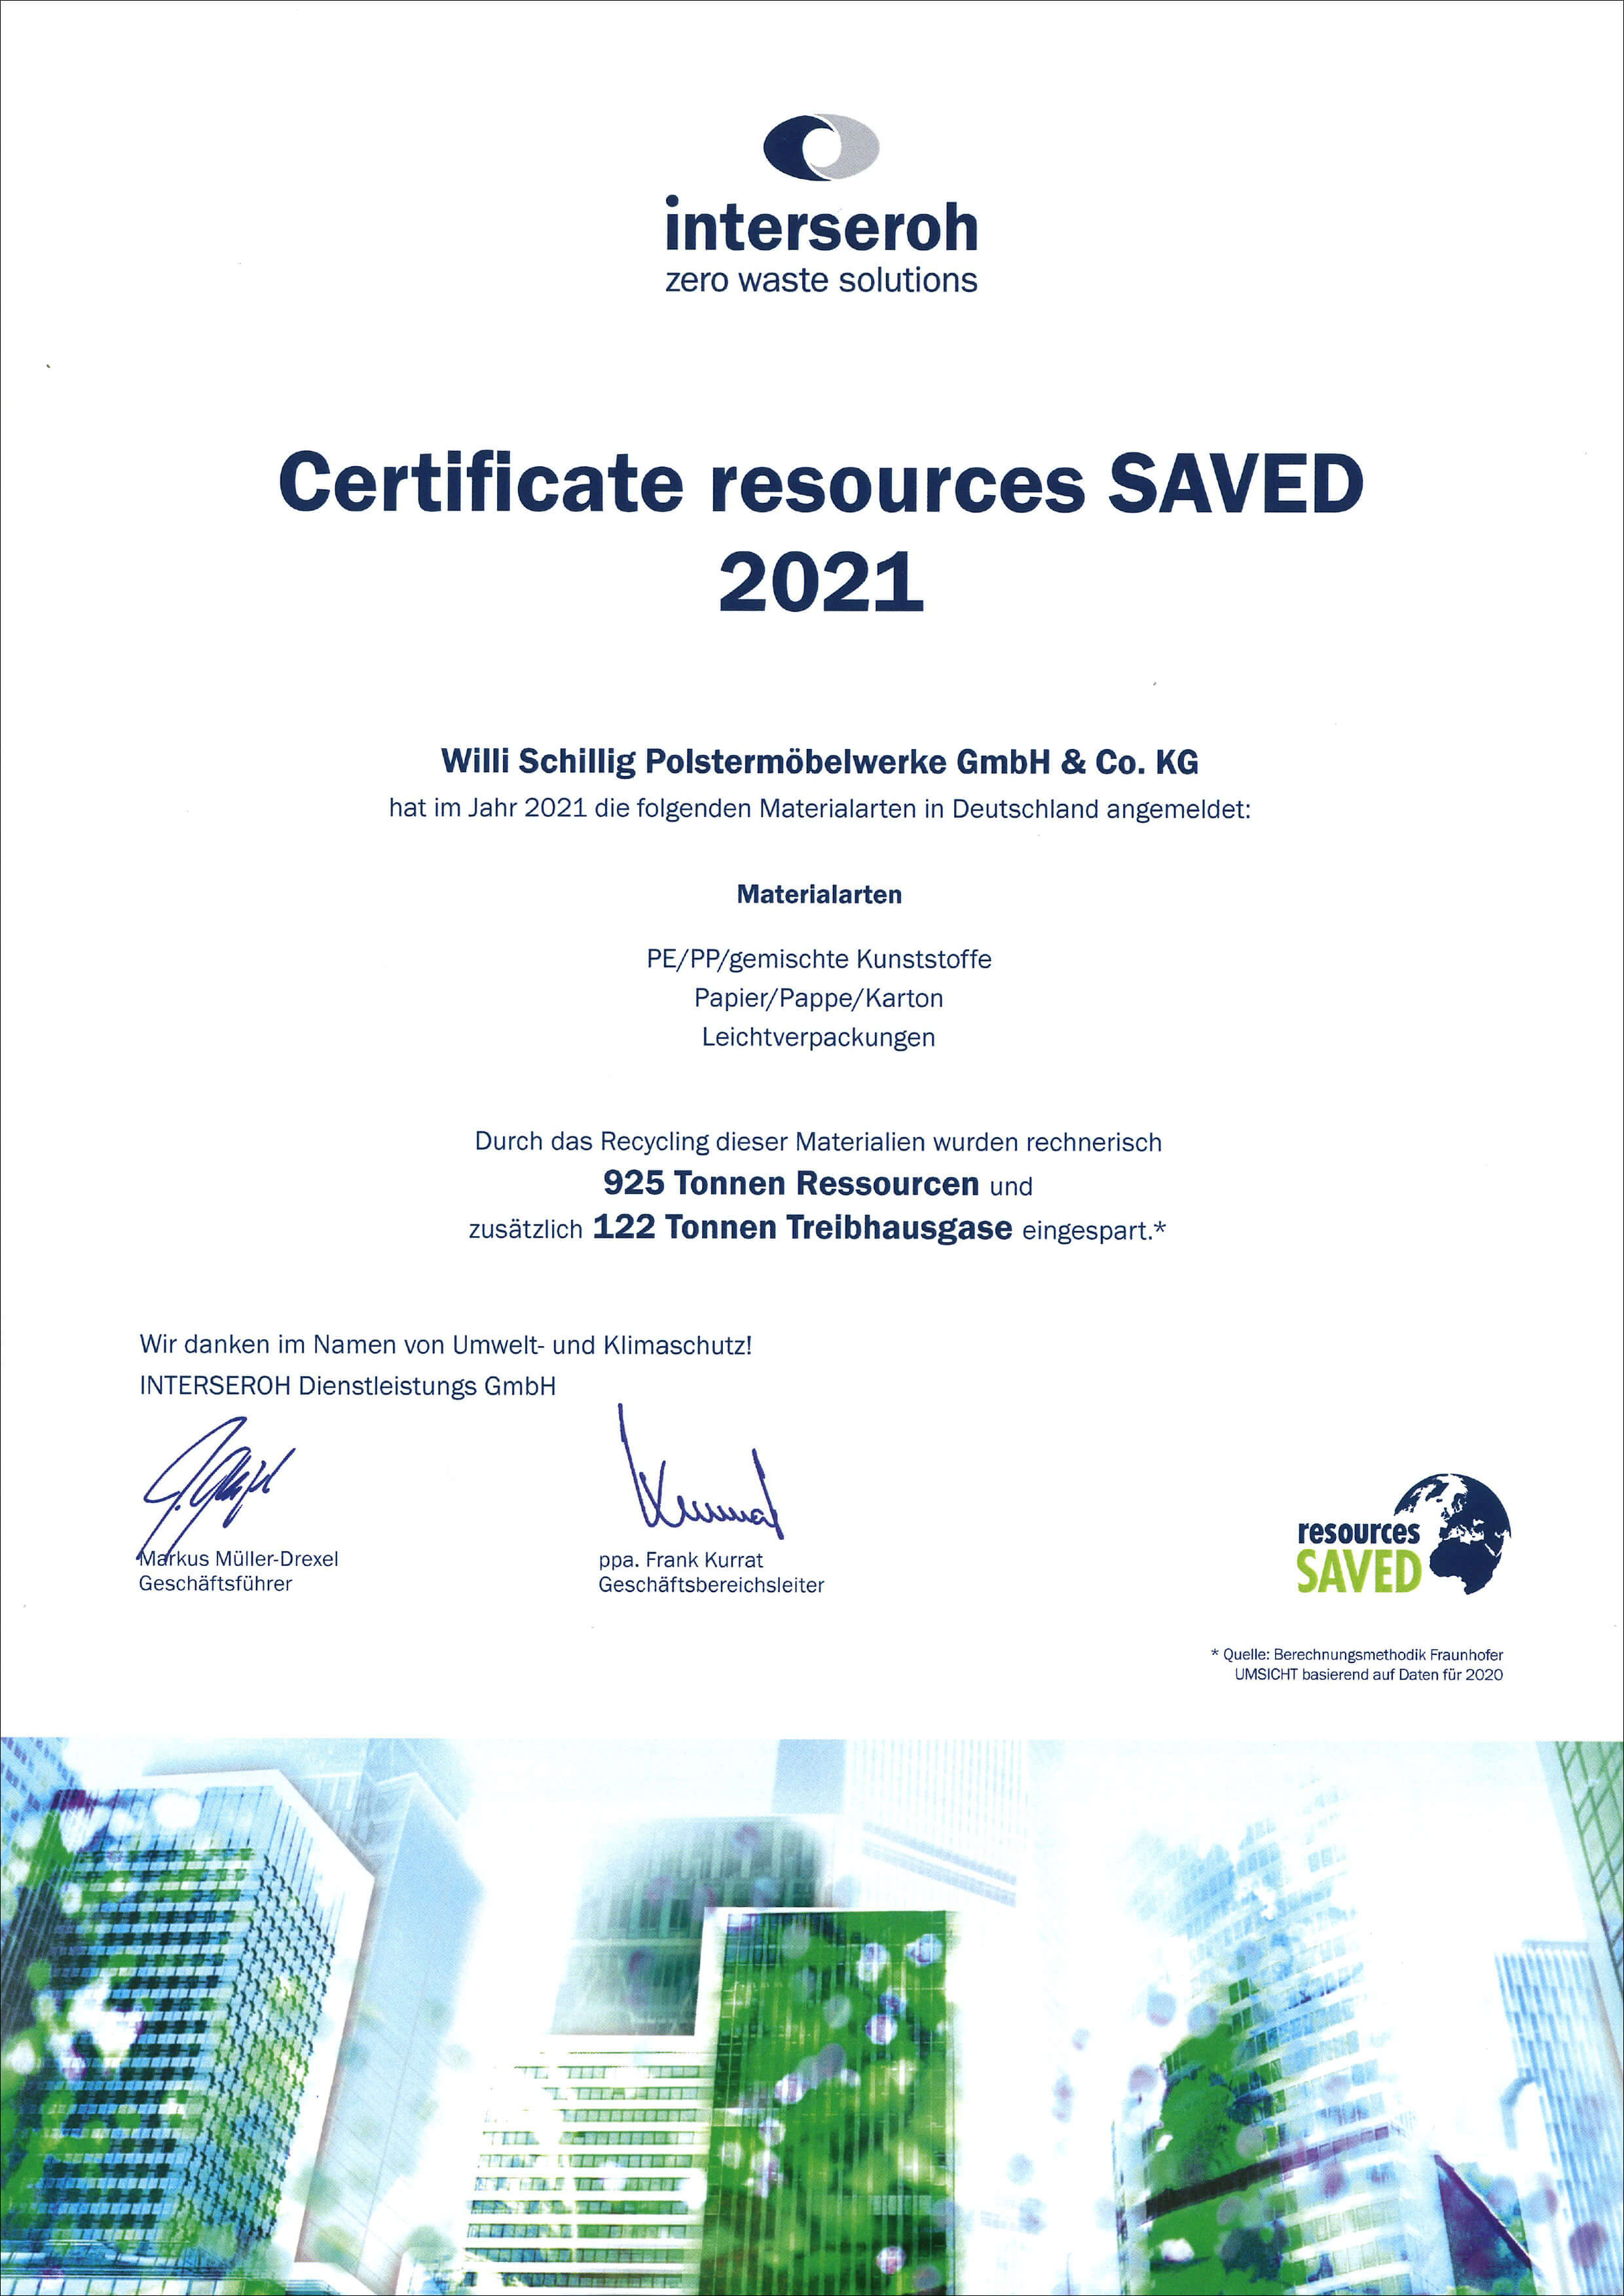 »resources SAVED« – Ressourcenschonung durch Recycling